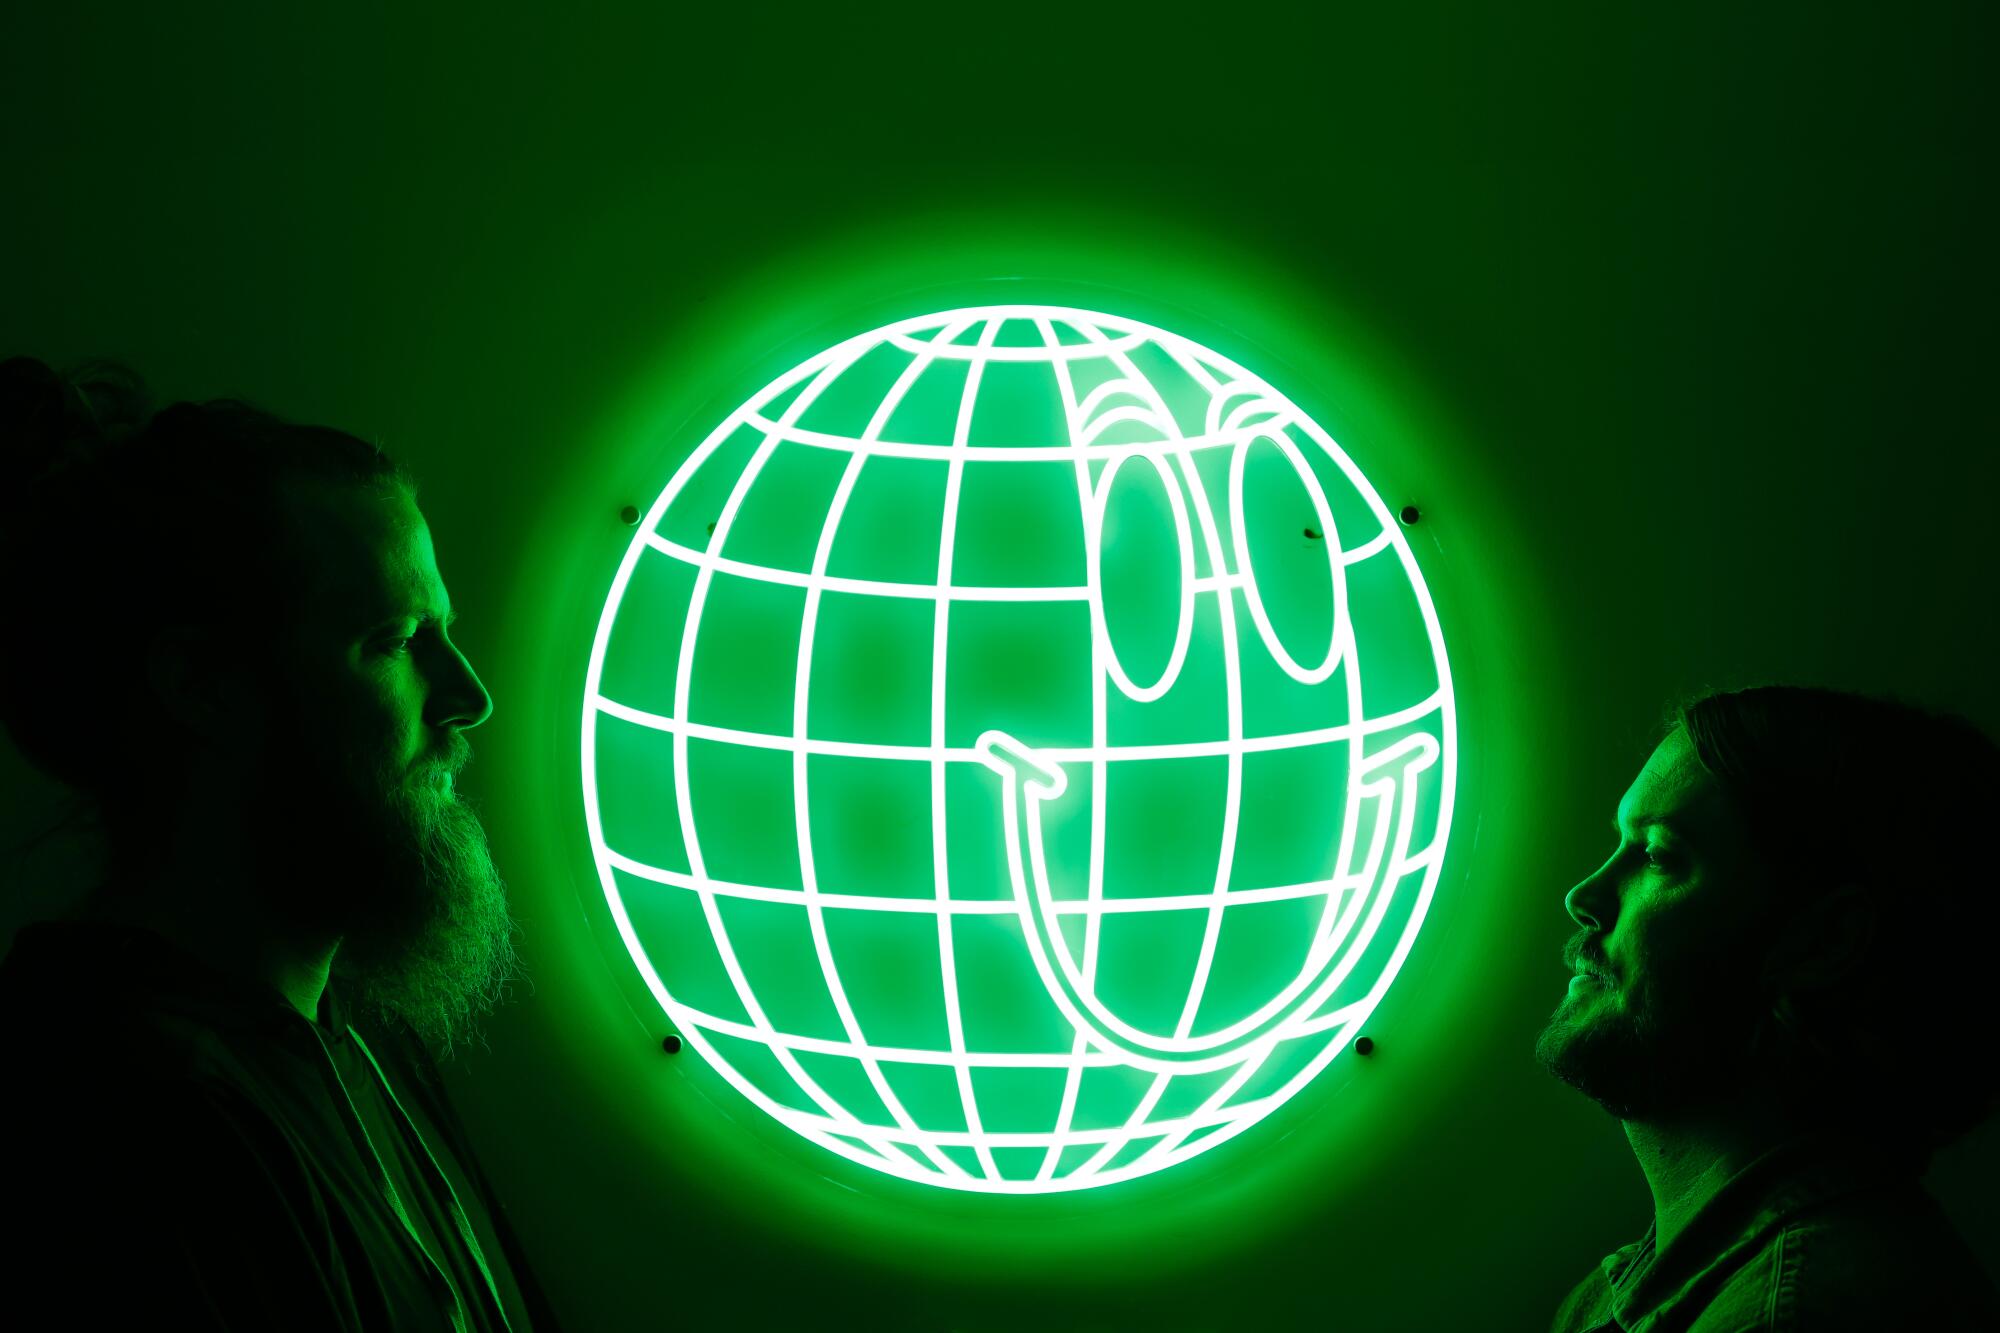 Two men face each other with a glowing neon green sign in between them